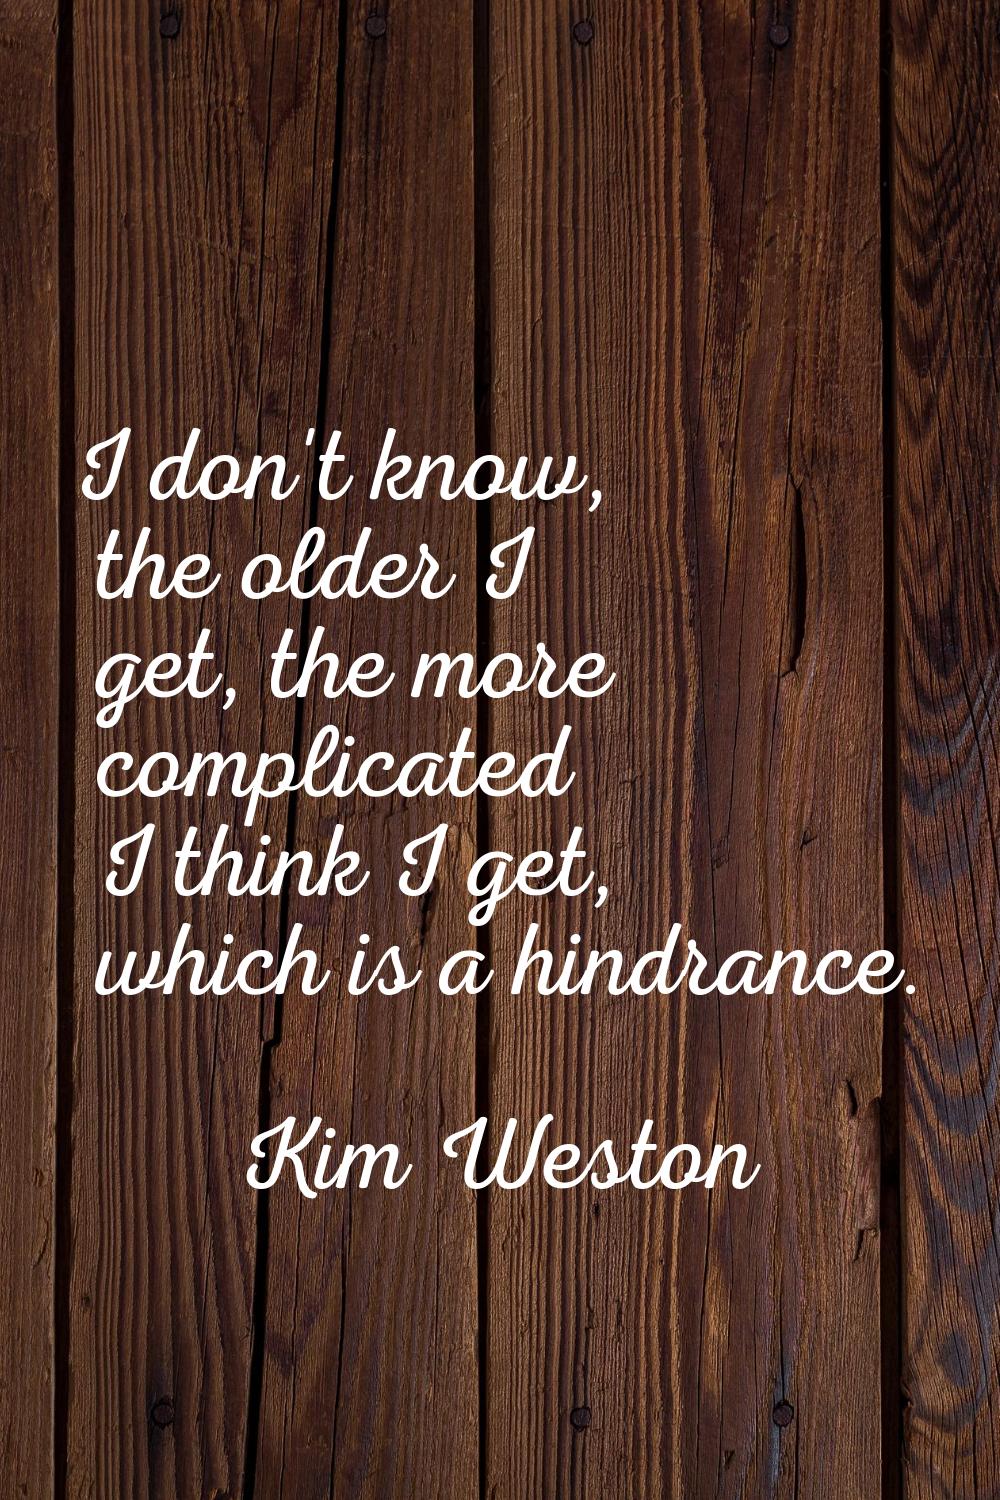 I don't know, the older I get, the more complicated I think I get, which is a hindrance.